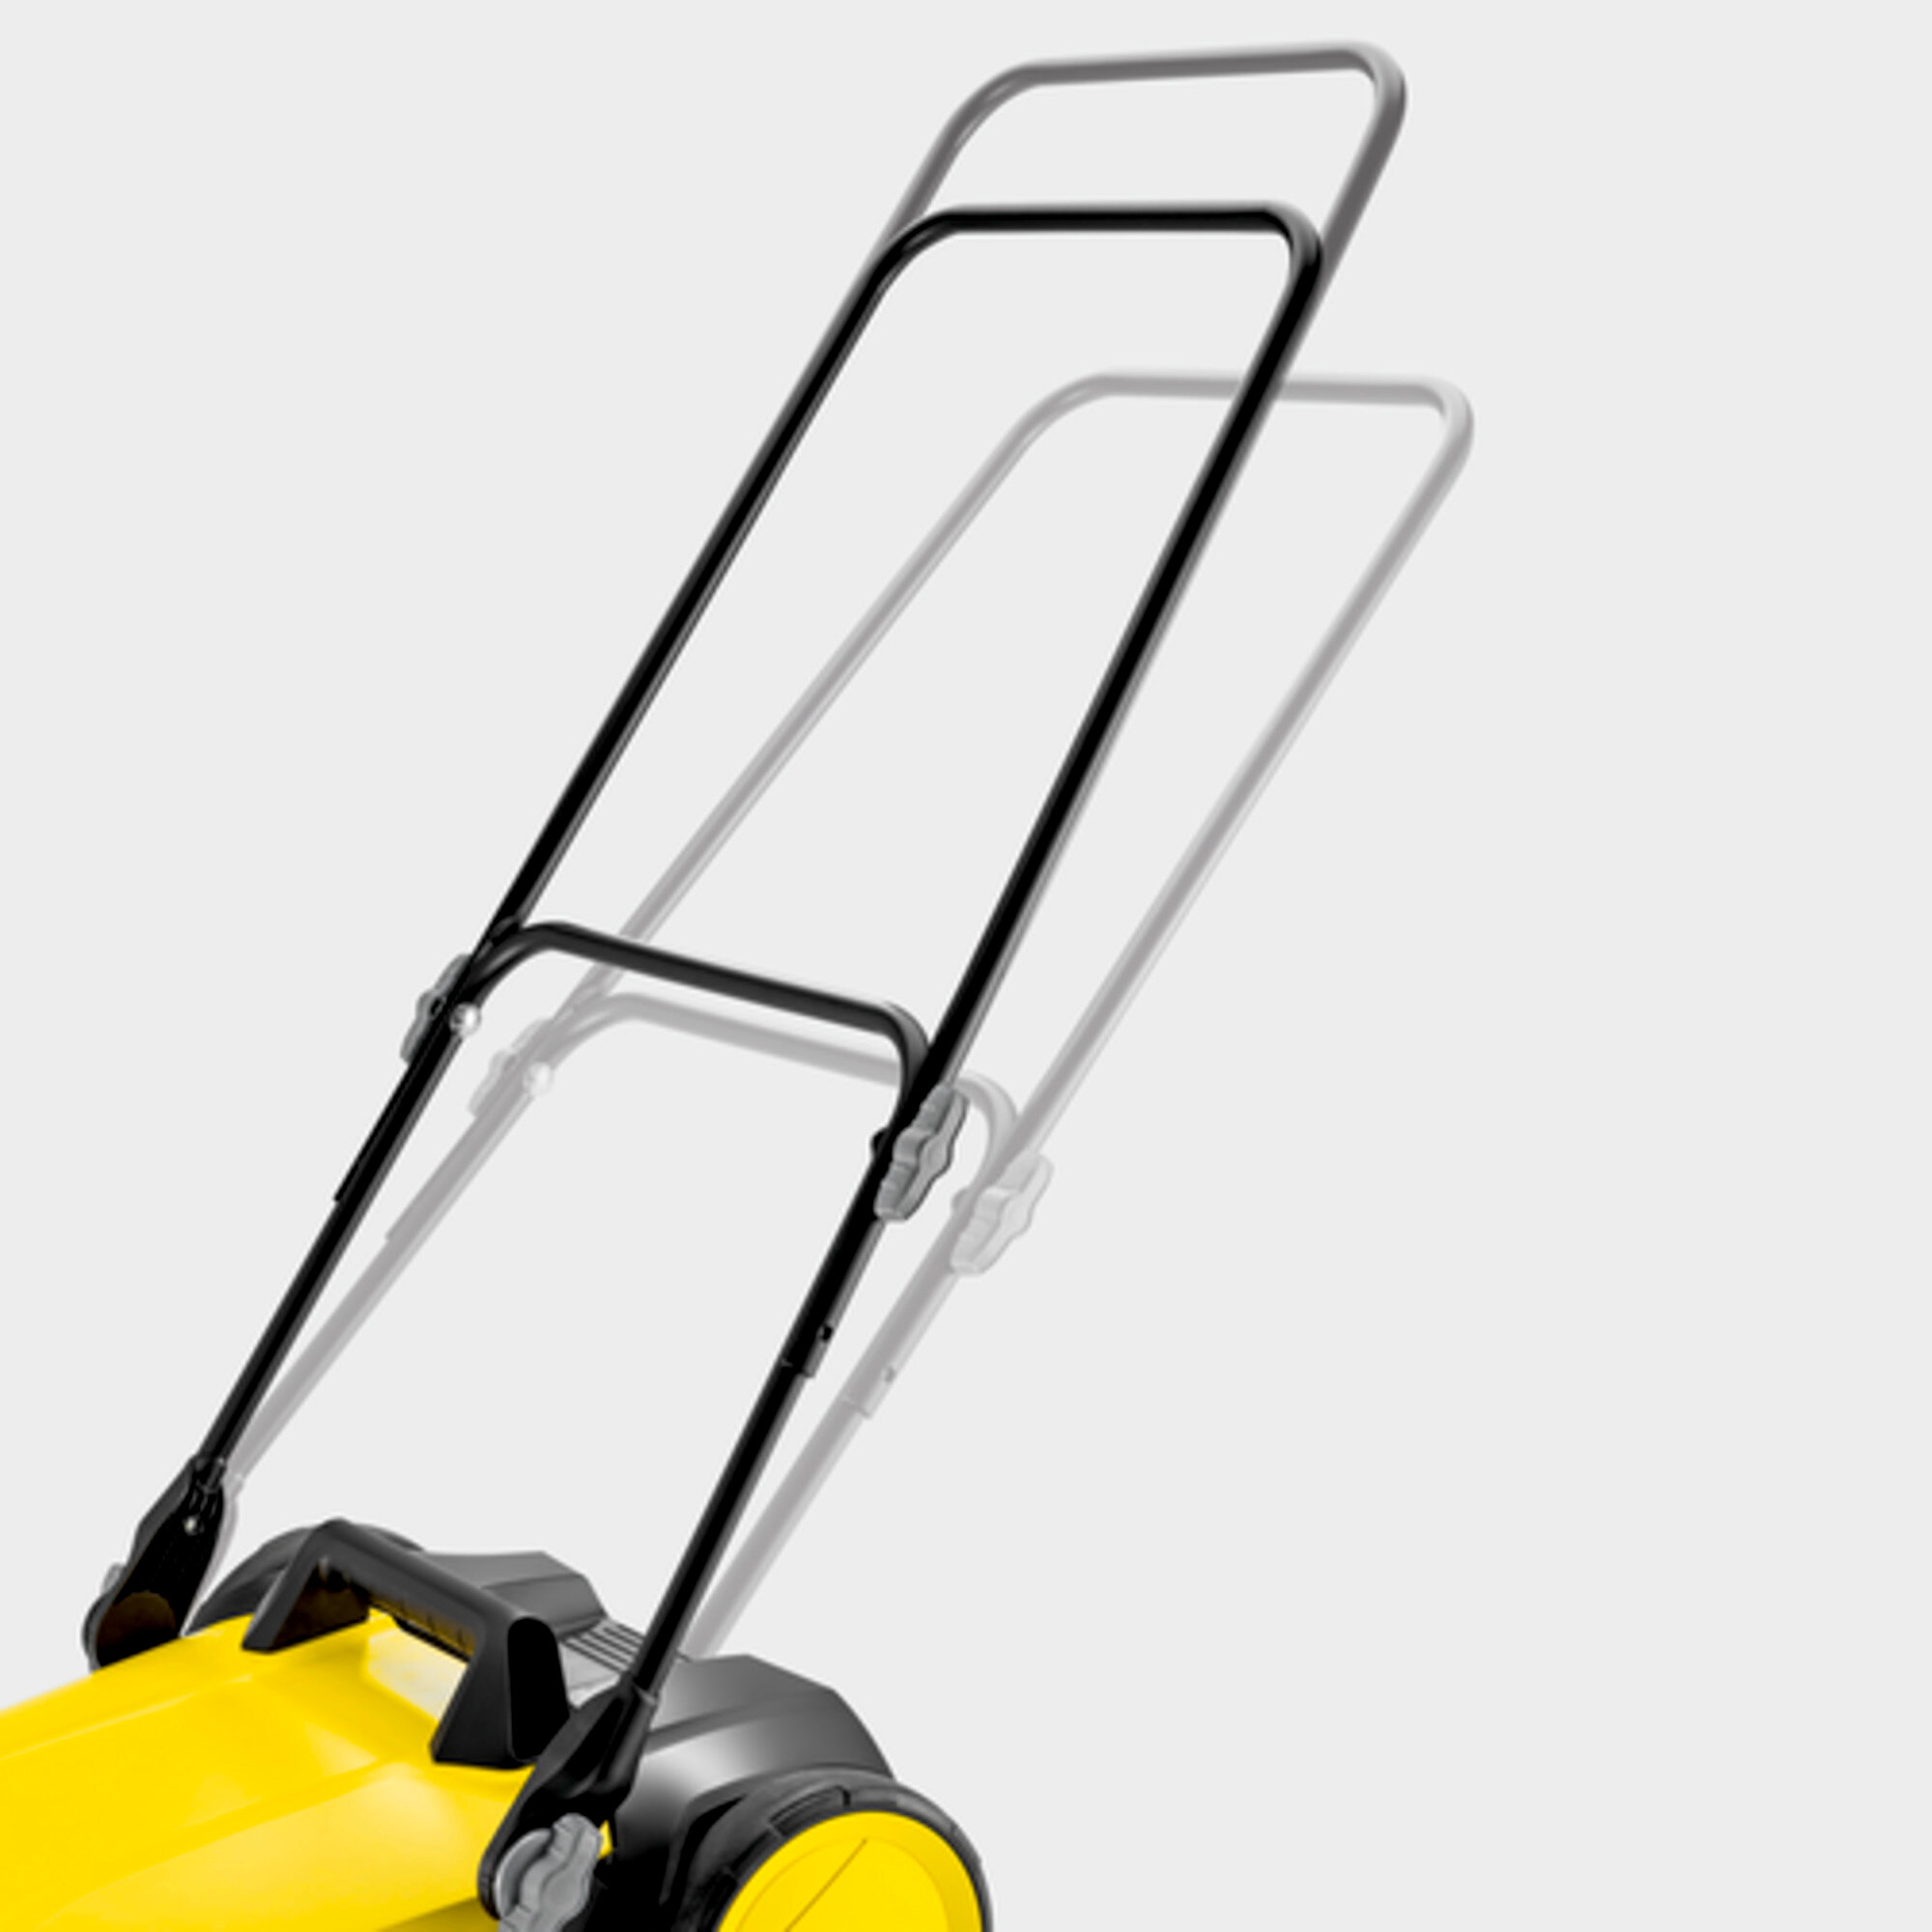 Push sweeper S 4 Twin: Infinitely variable push handle